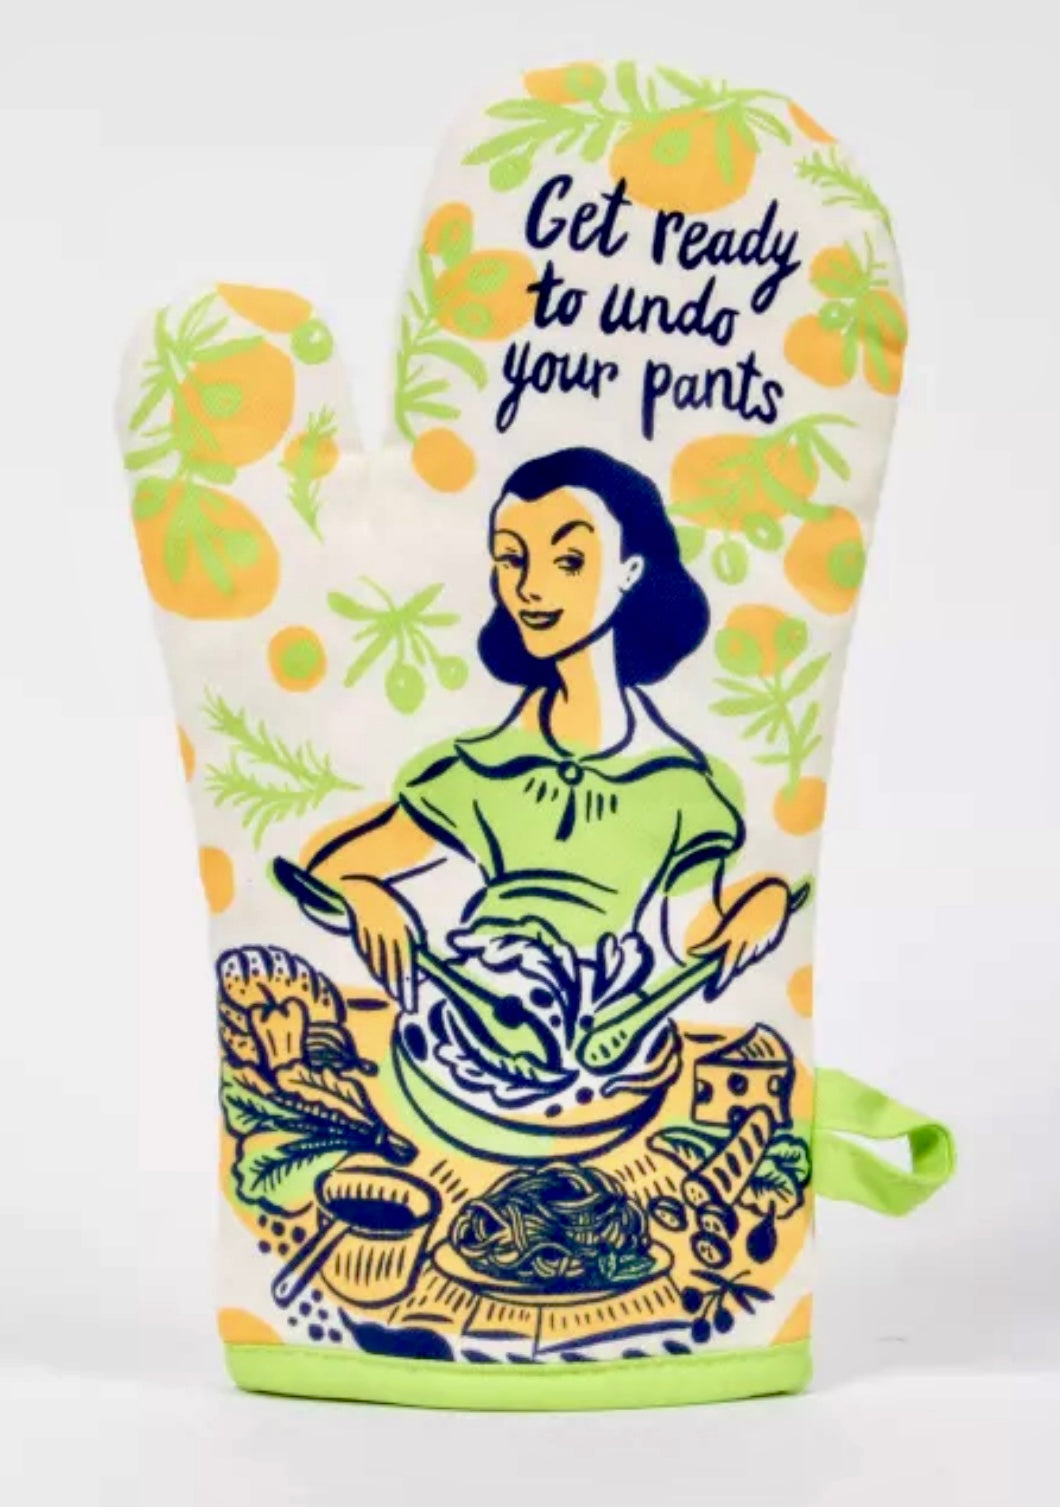 Get Ready to Undo your Pants Oven Blue Q Mitt